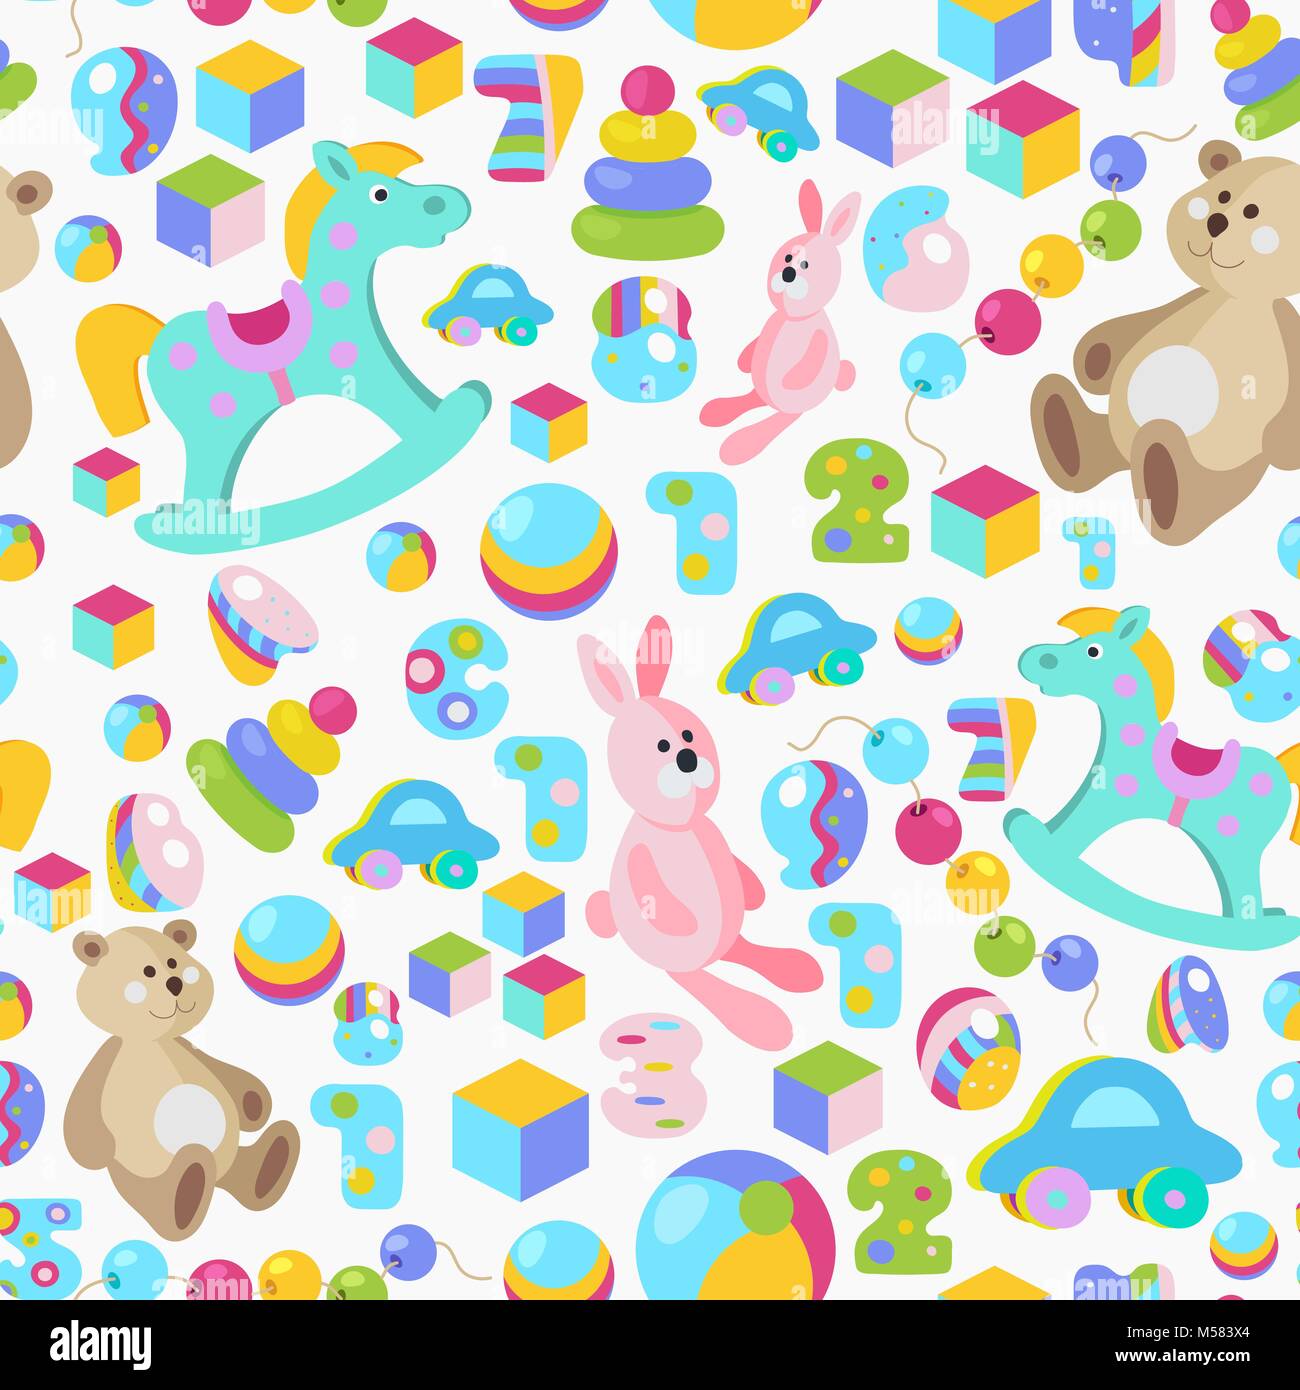 Kids toys cartoon style colorful vector seamless pattern Stock Vector